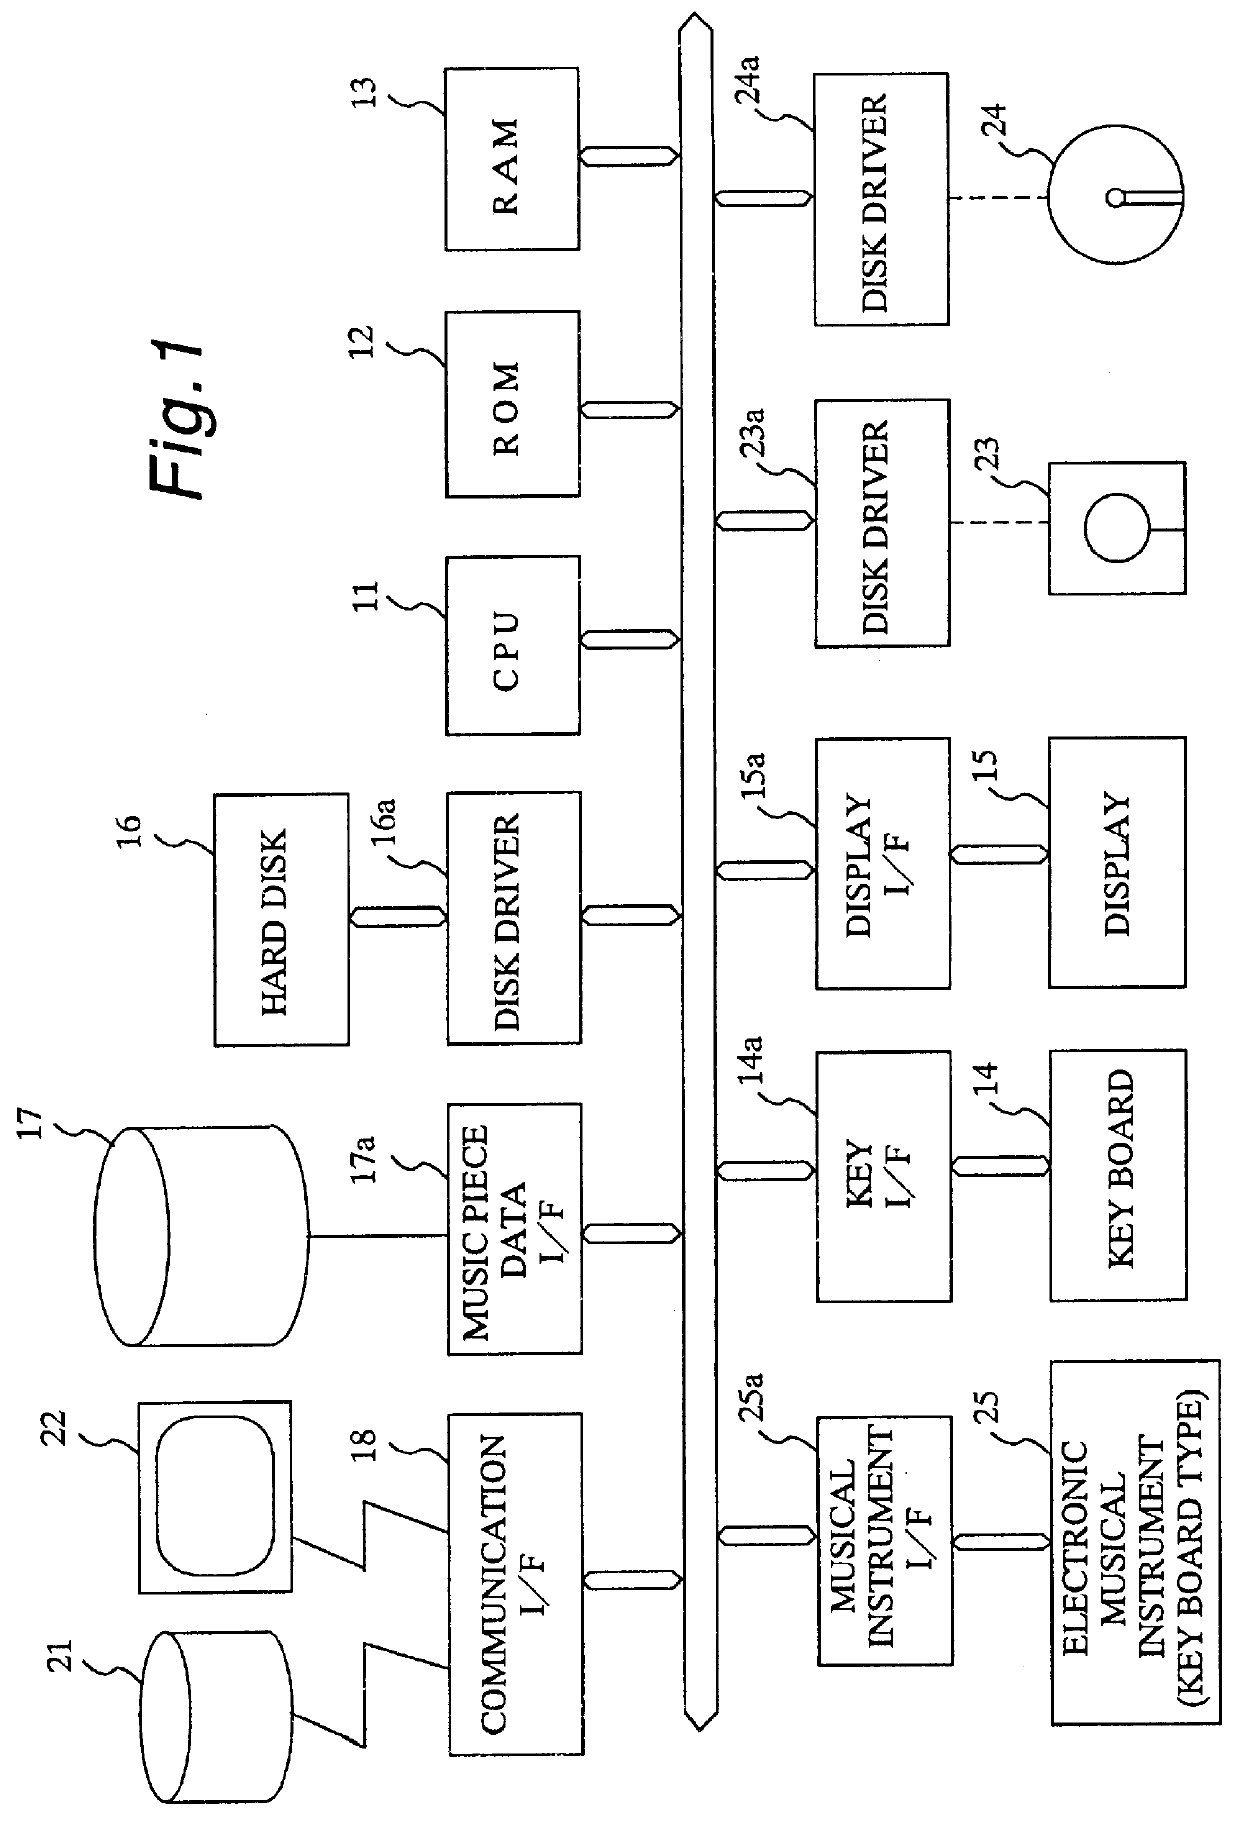 Musical performance teaching system and method, and machine readable medium containing program therefor